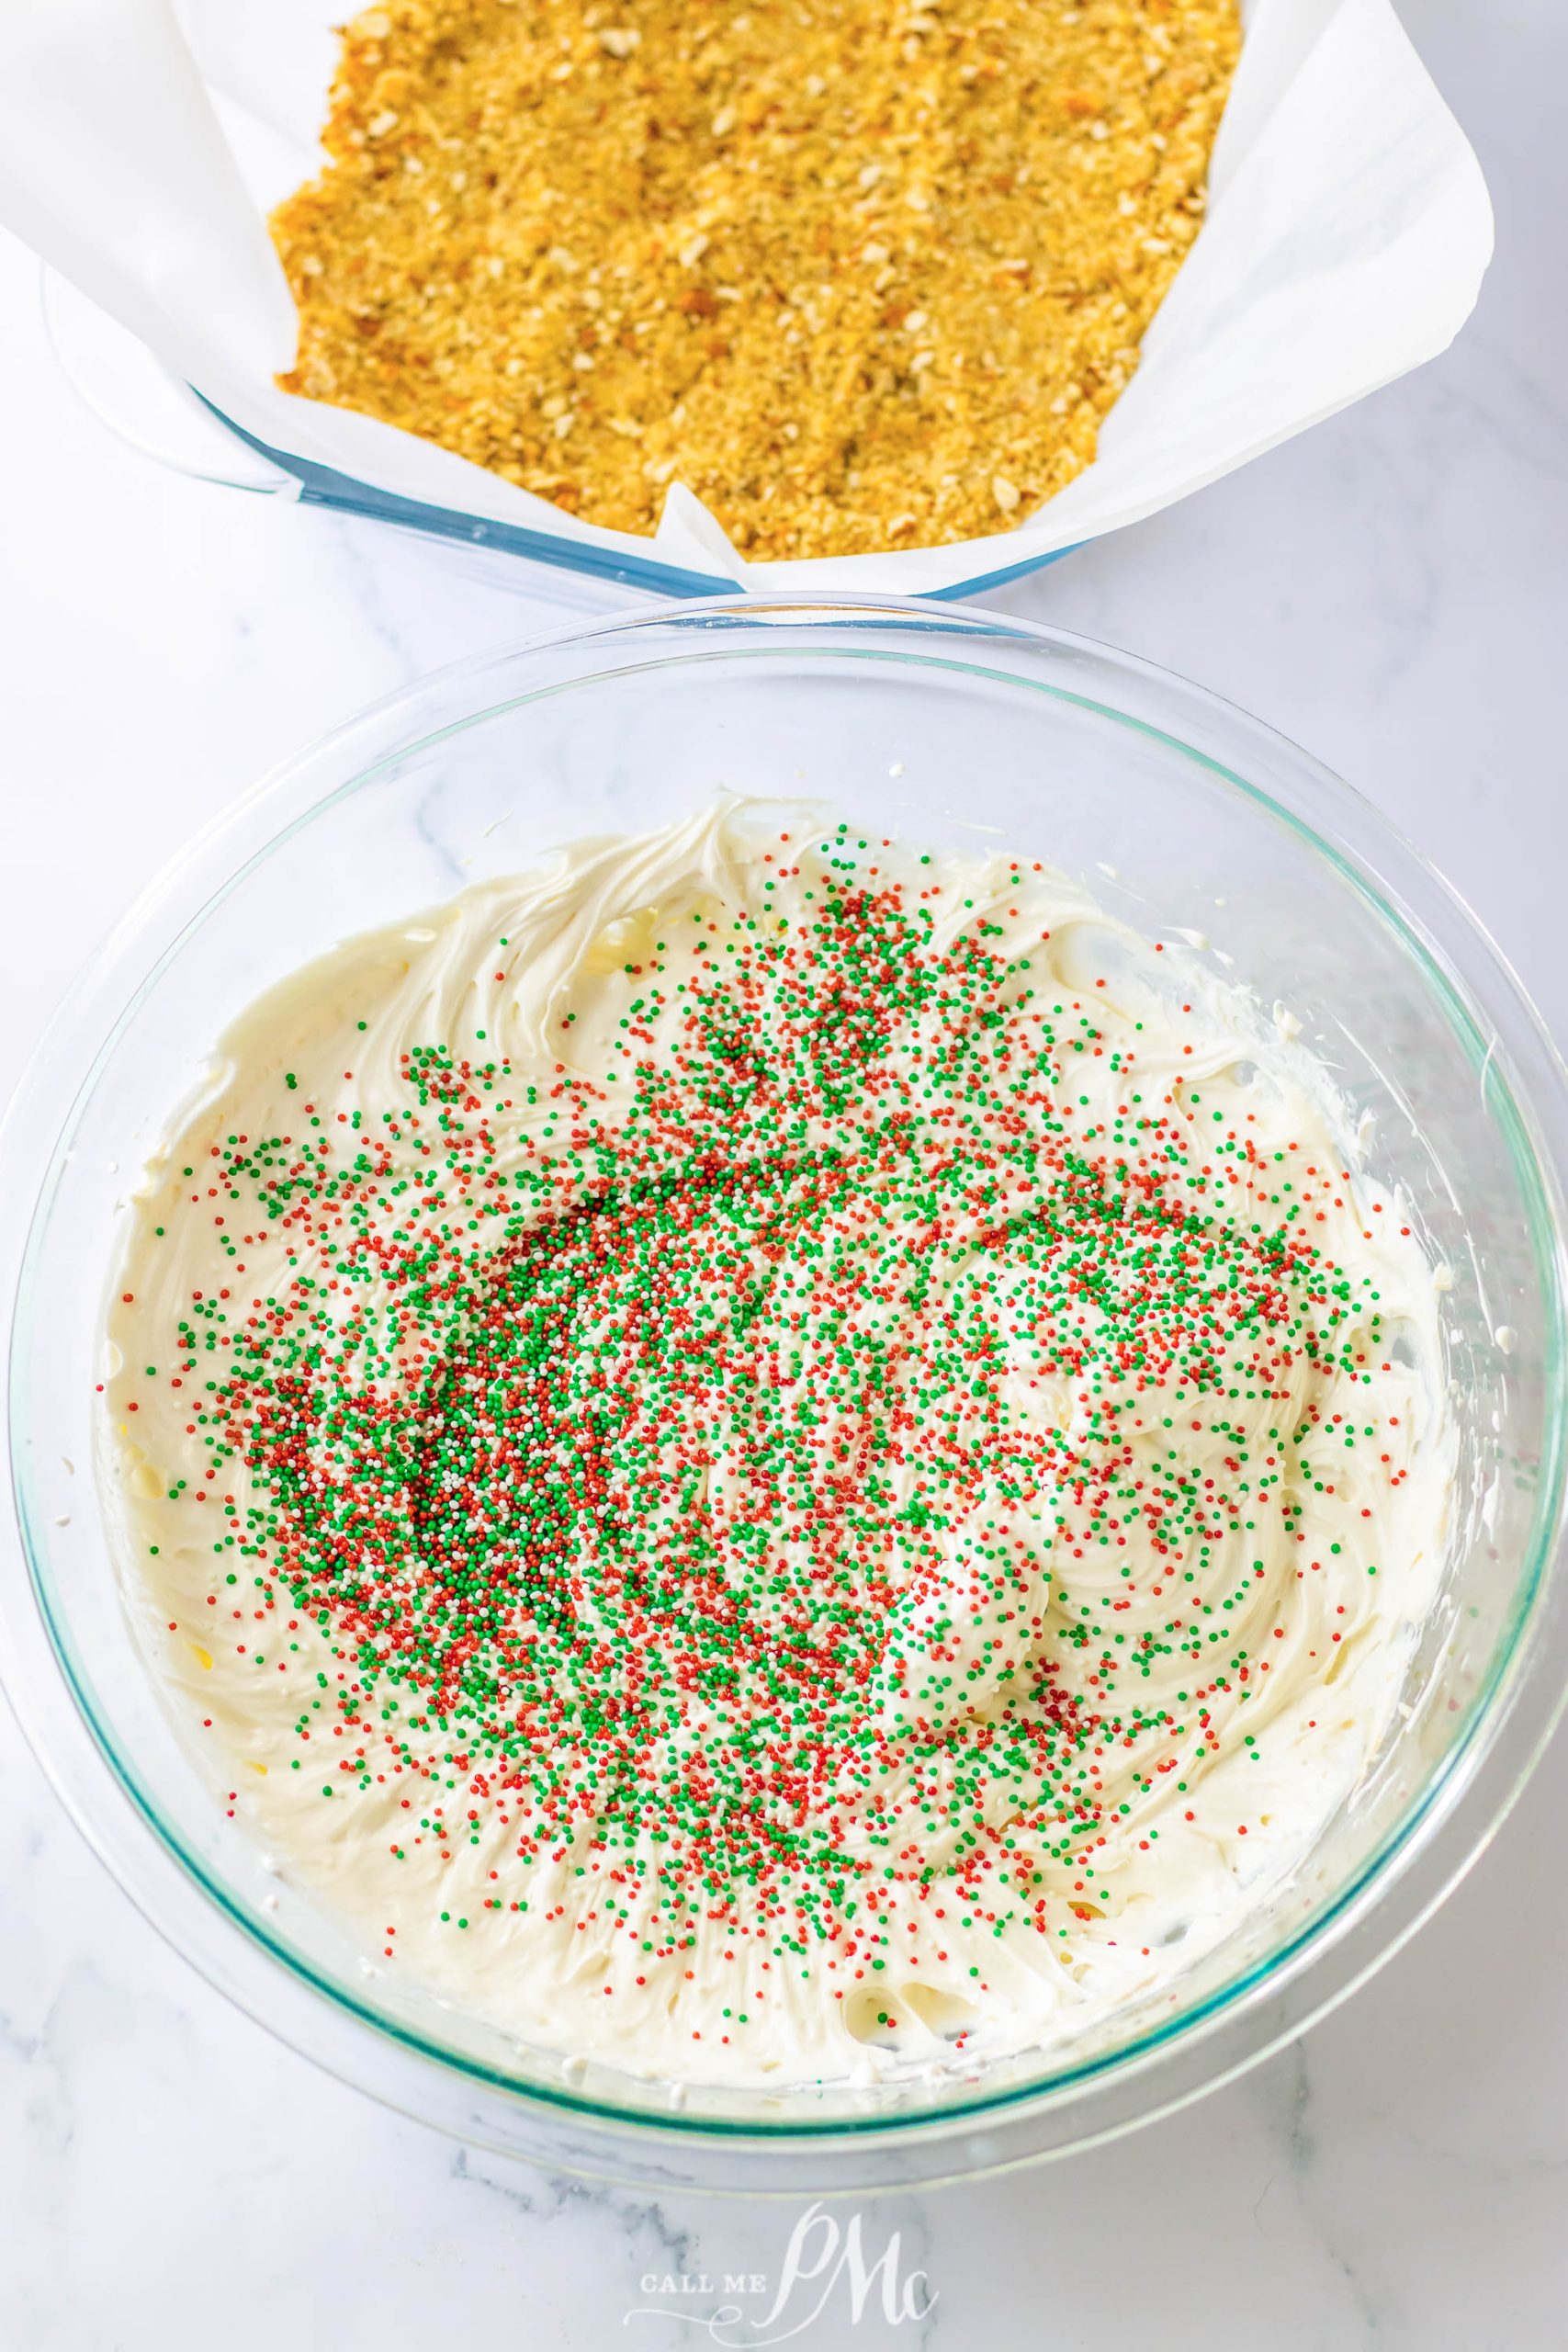 A bowl filled with whipped cream and sprinkles.